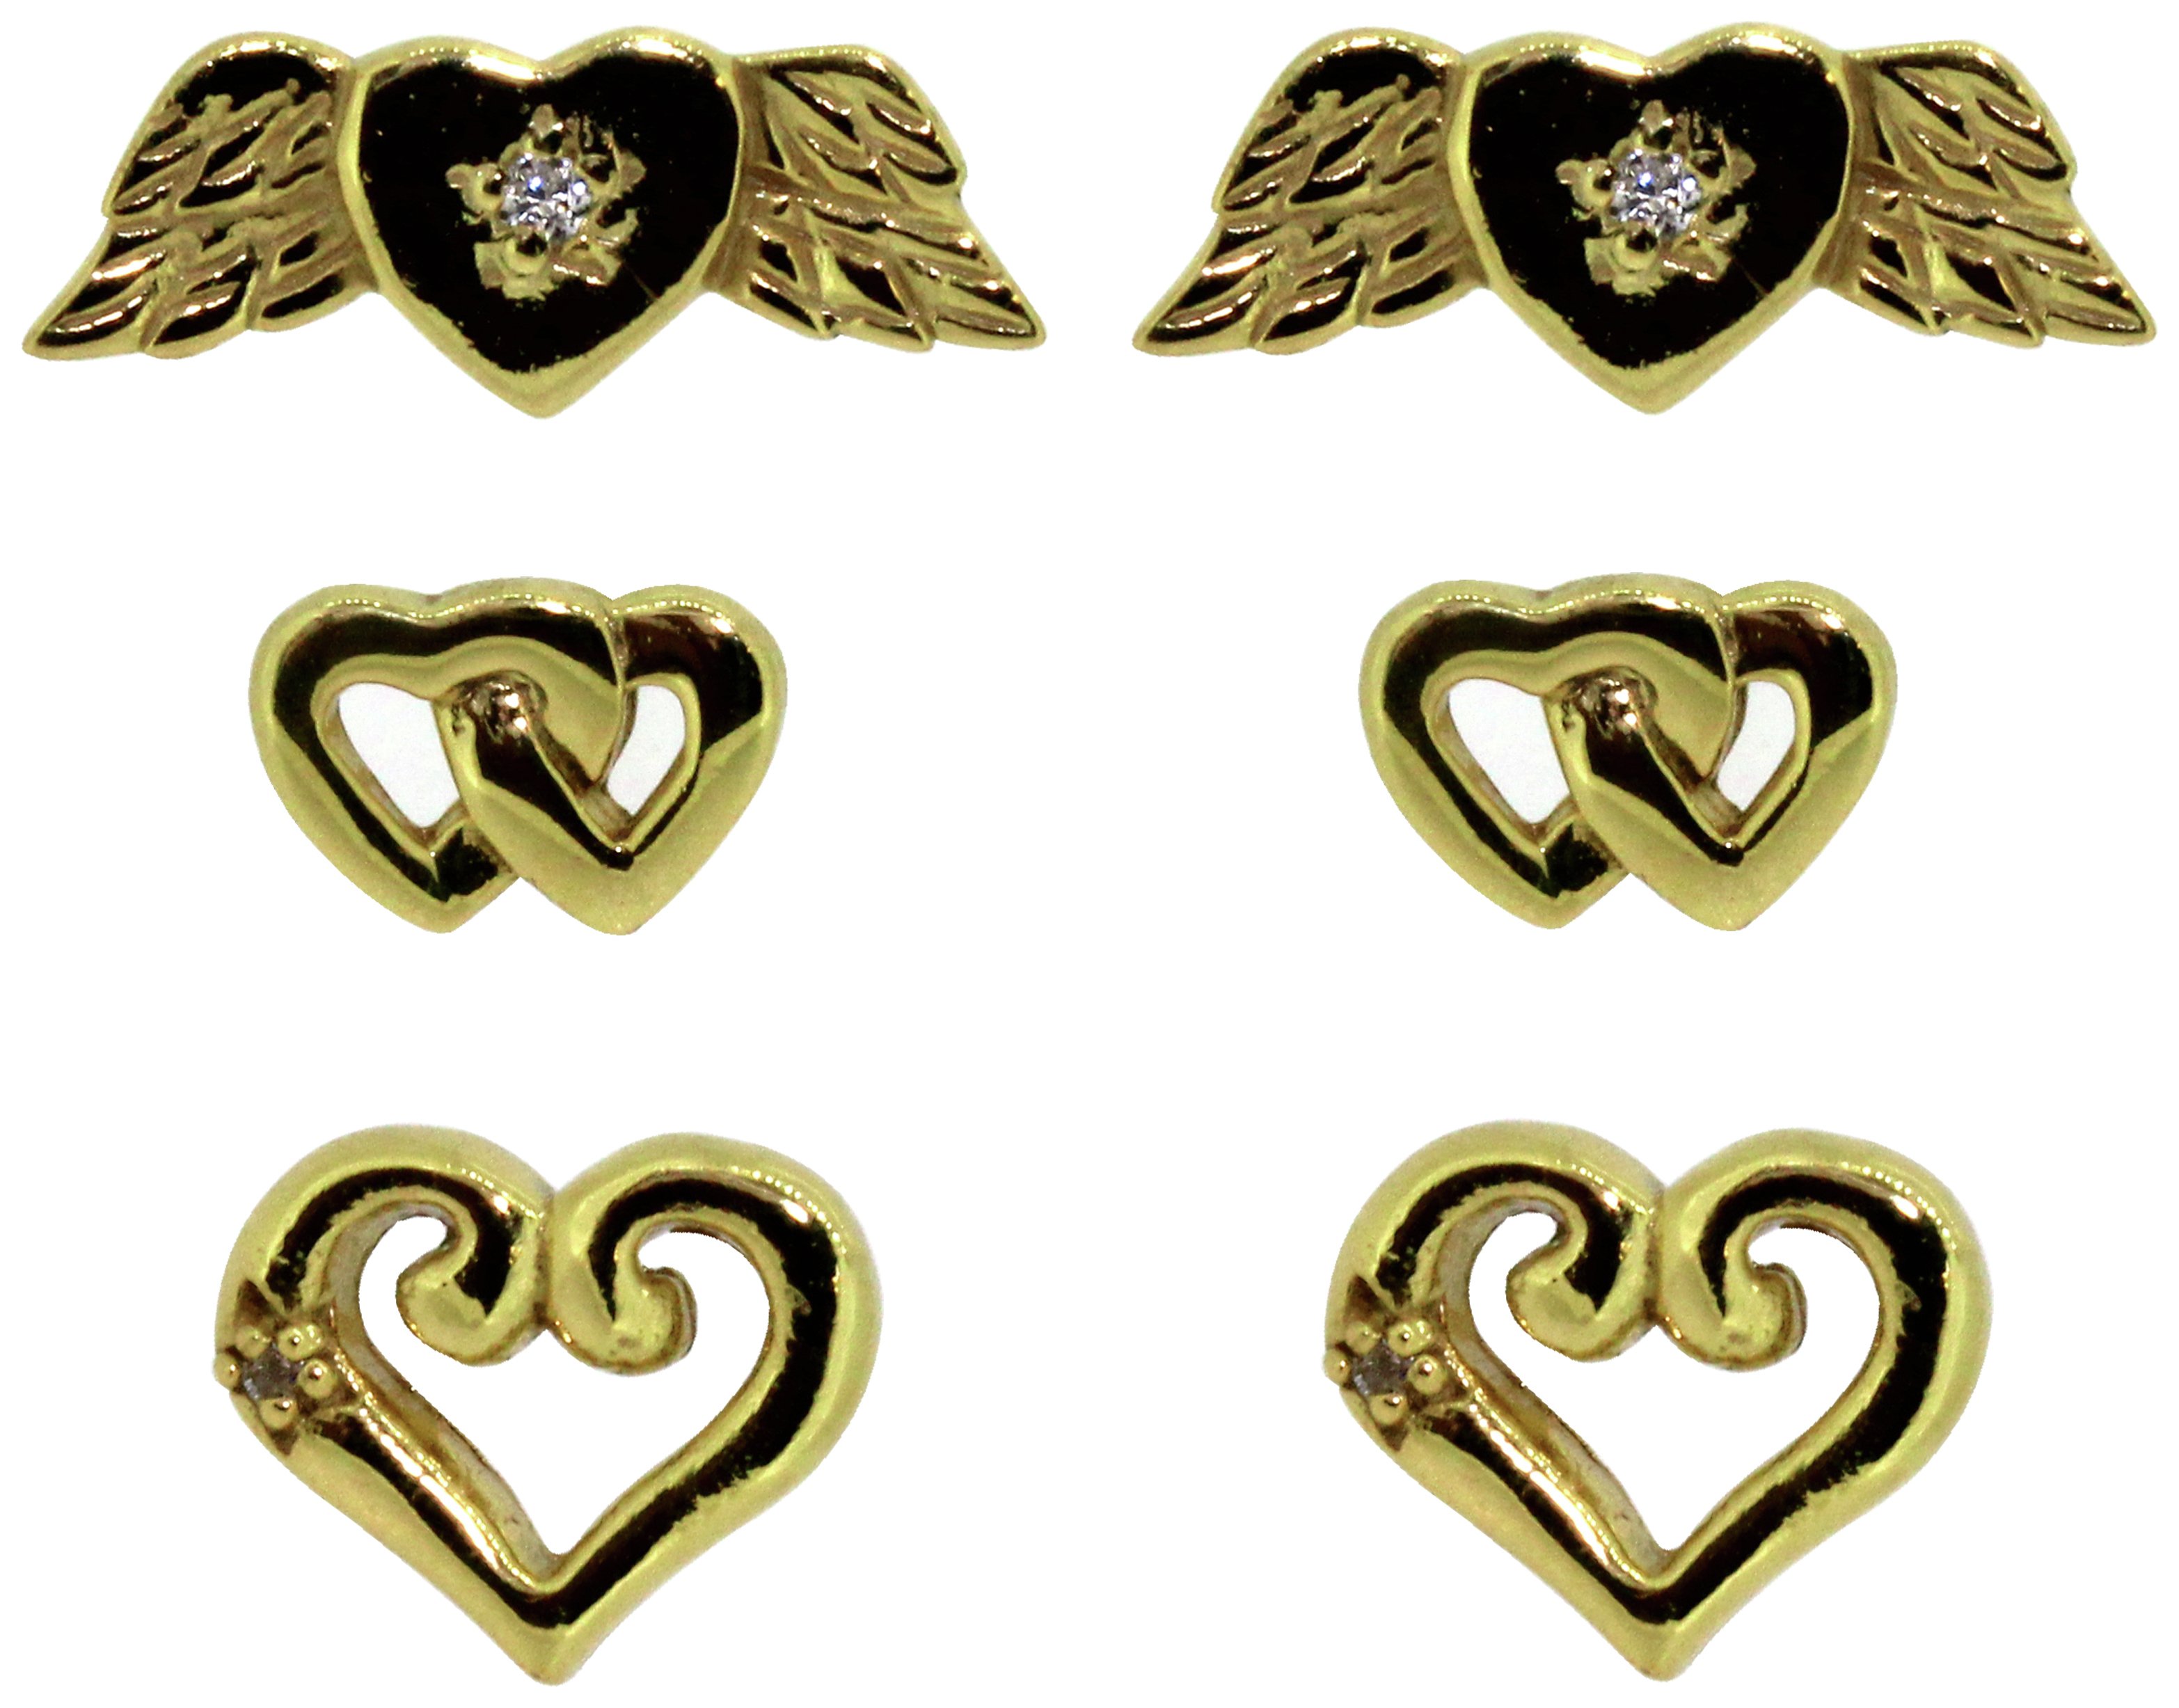 Link Up Gold Plated Silver Heart Stud Earrings - Set of 3.